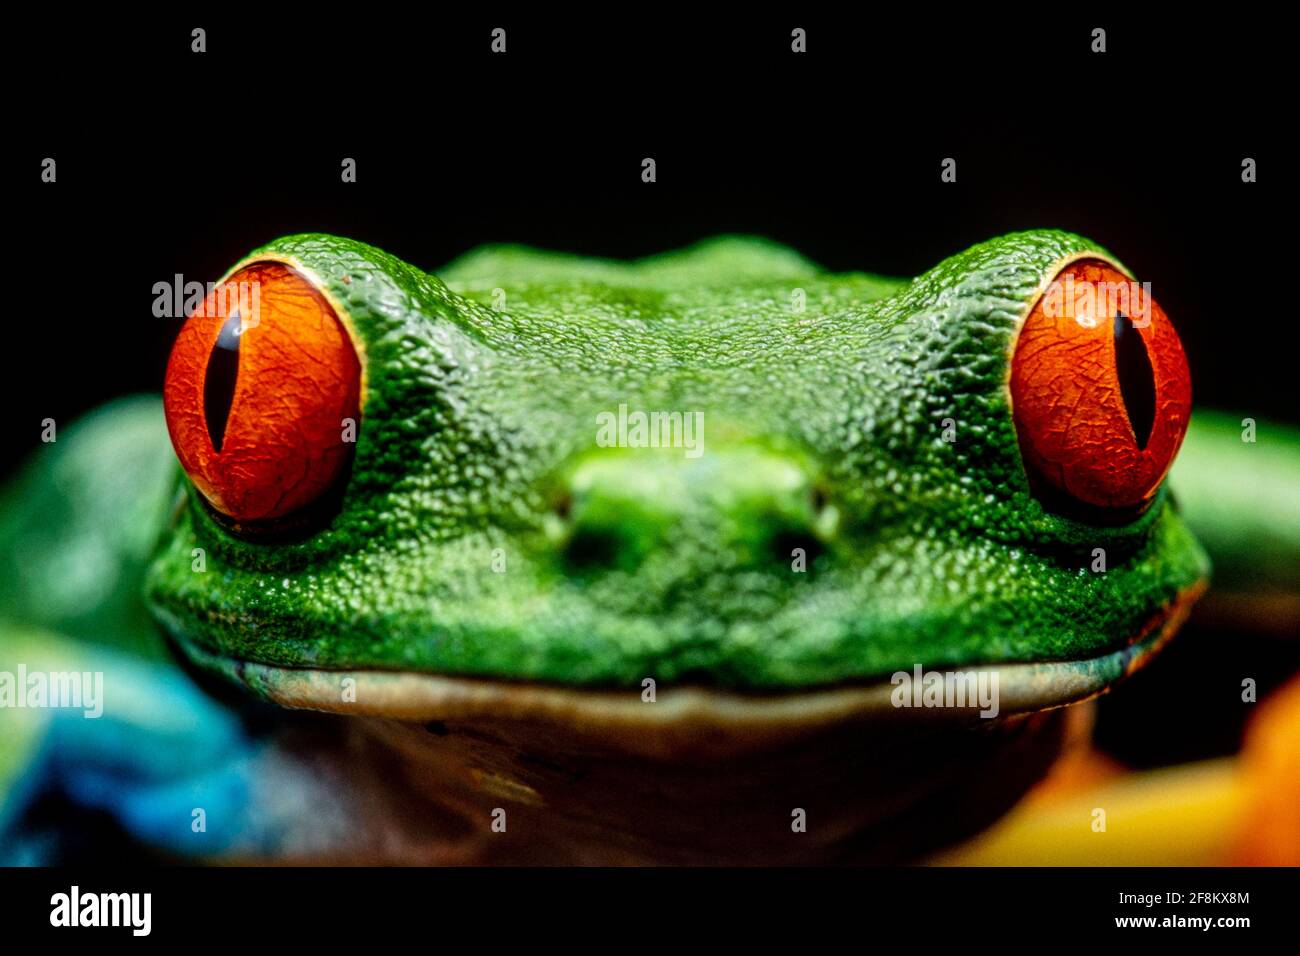 A close-up portrait of a Red-eyed Leaf Frog, Agalychnis callidryas.  These frogs are primarily nocturnal, sleeping during the day. Stock Photo